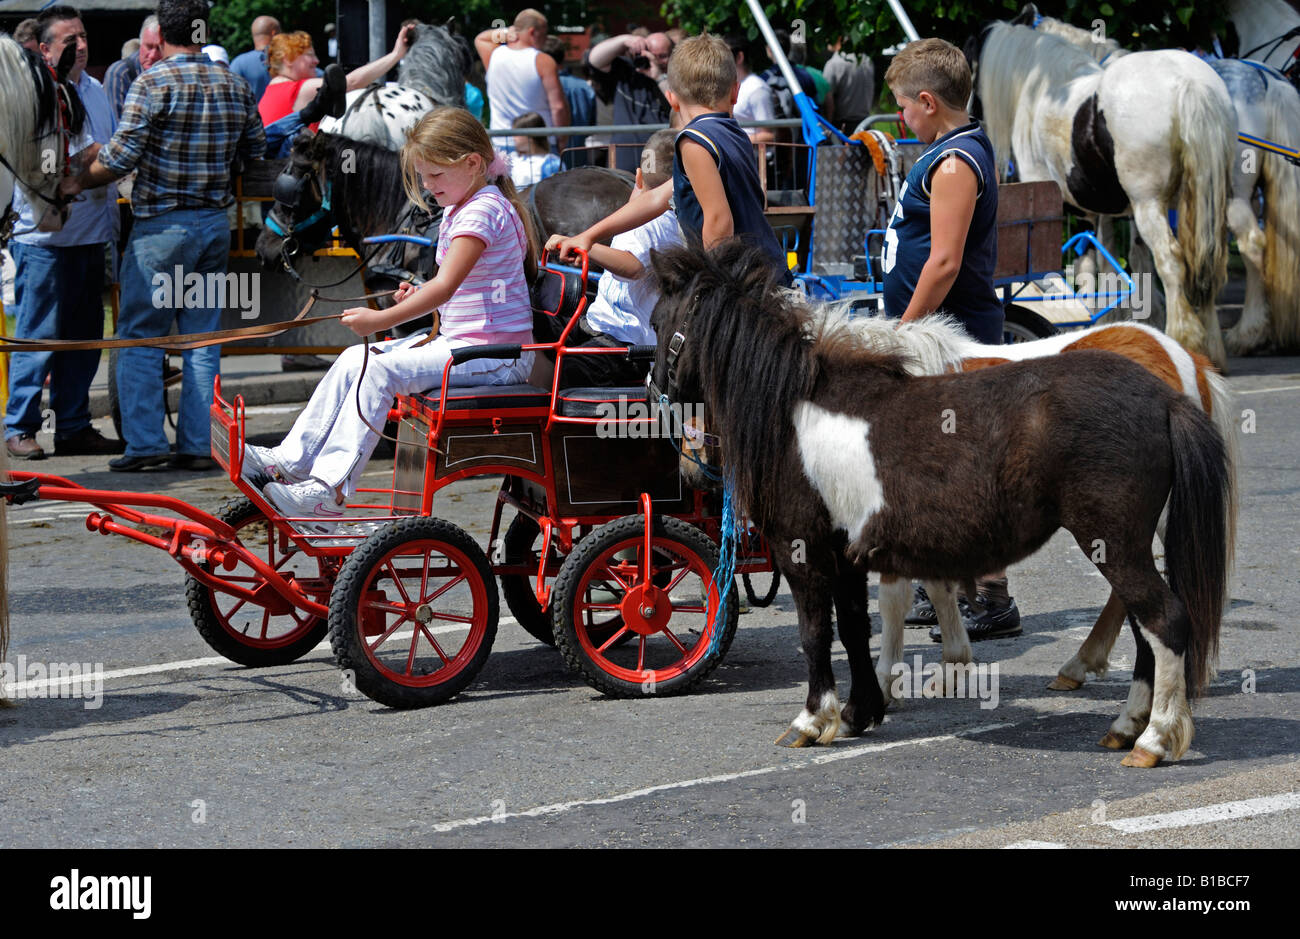 Miniature cart and ponies at Appleby Horse Fair. Appleby-in-Westmorland, Cumbria, England, United Kingdom, Europe. Stock Photo